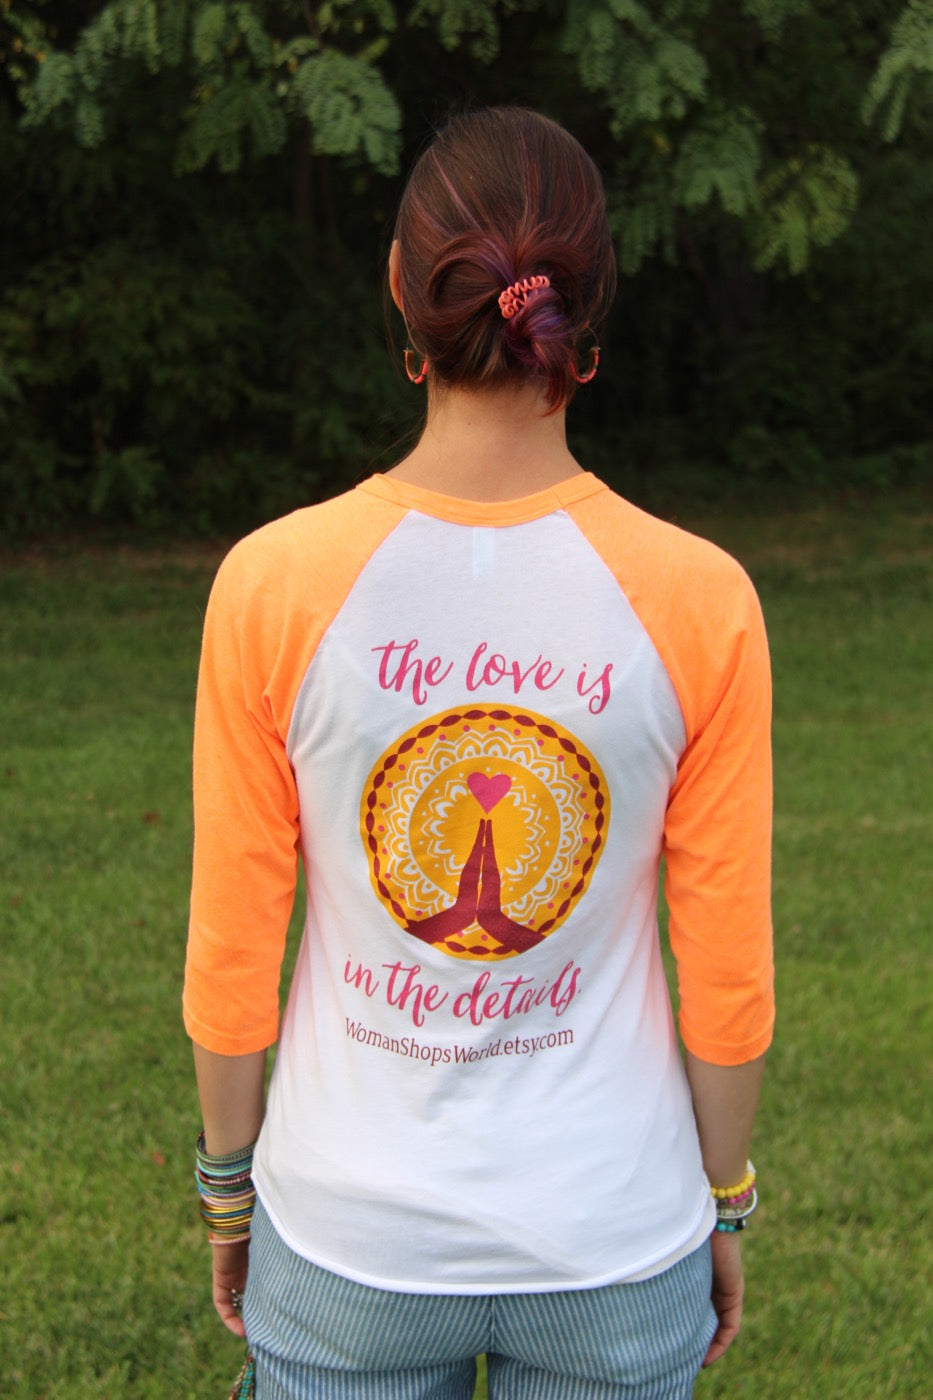 The love is in the details shirt